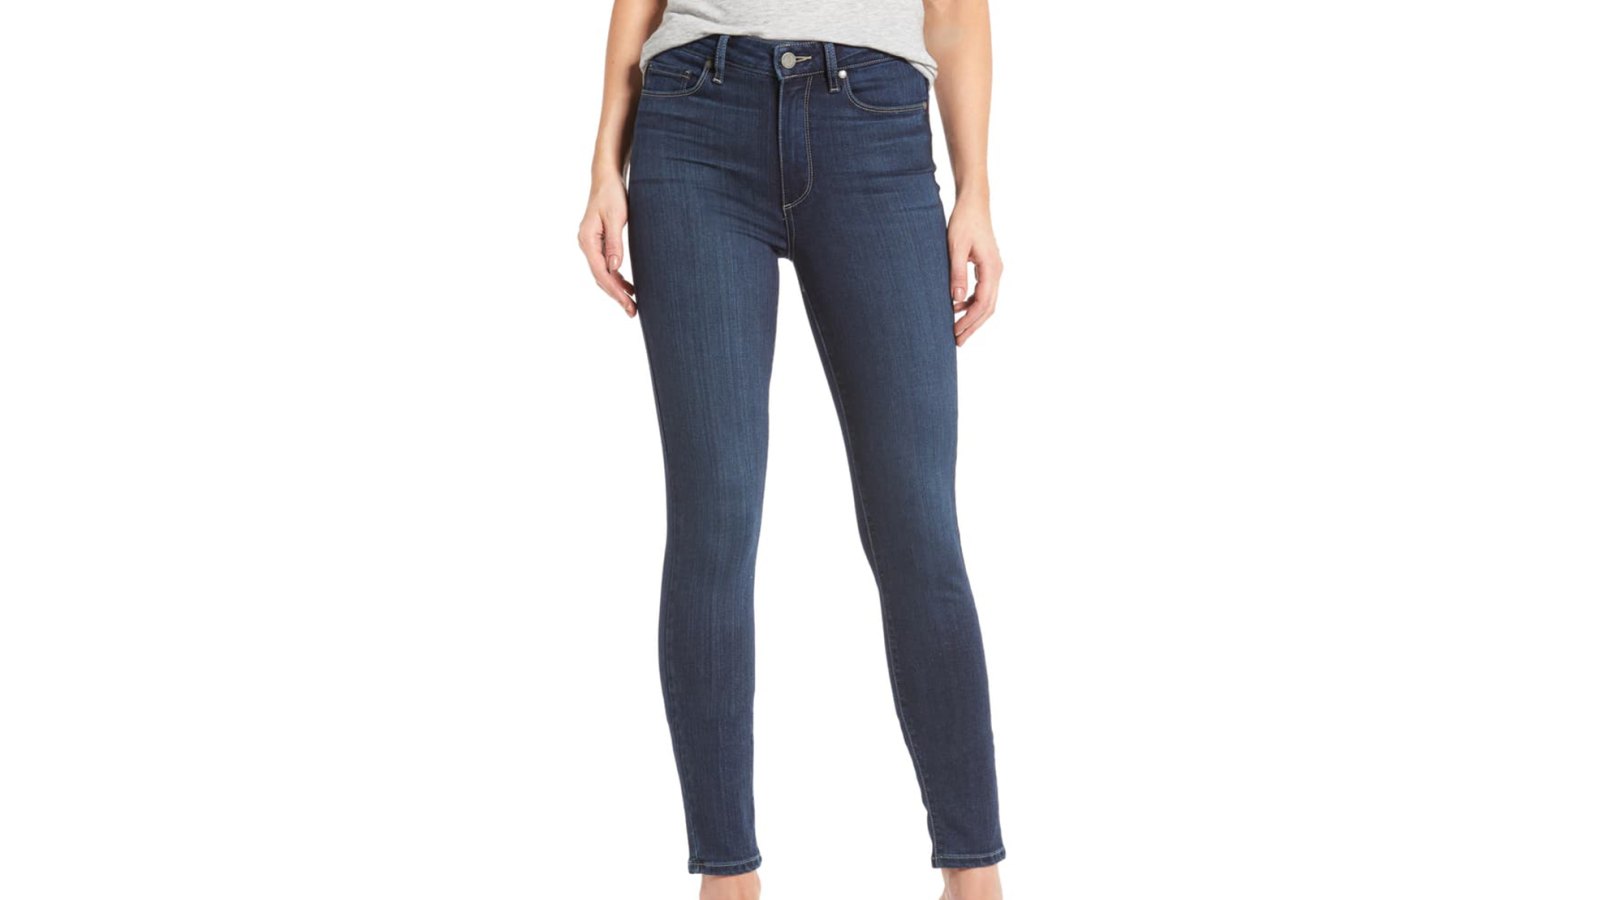 PAIGE Transcend - Hoxton High Waist Ankle Skinny Jeans